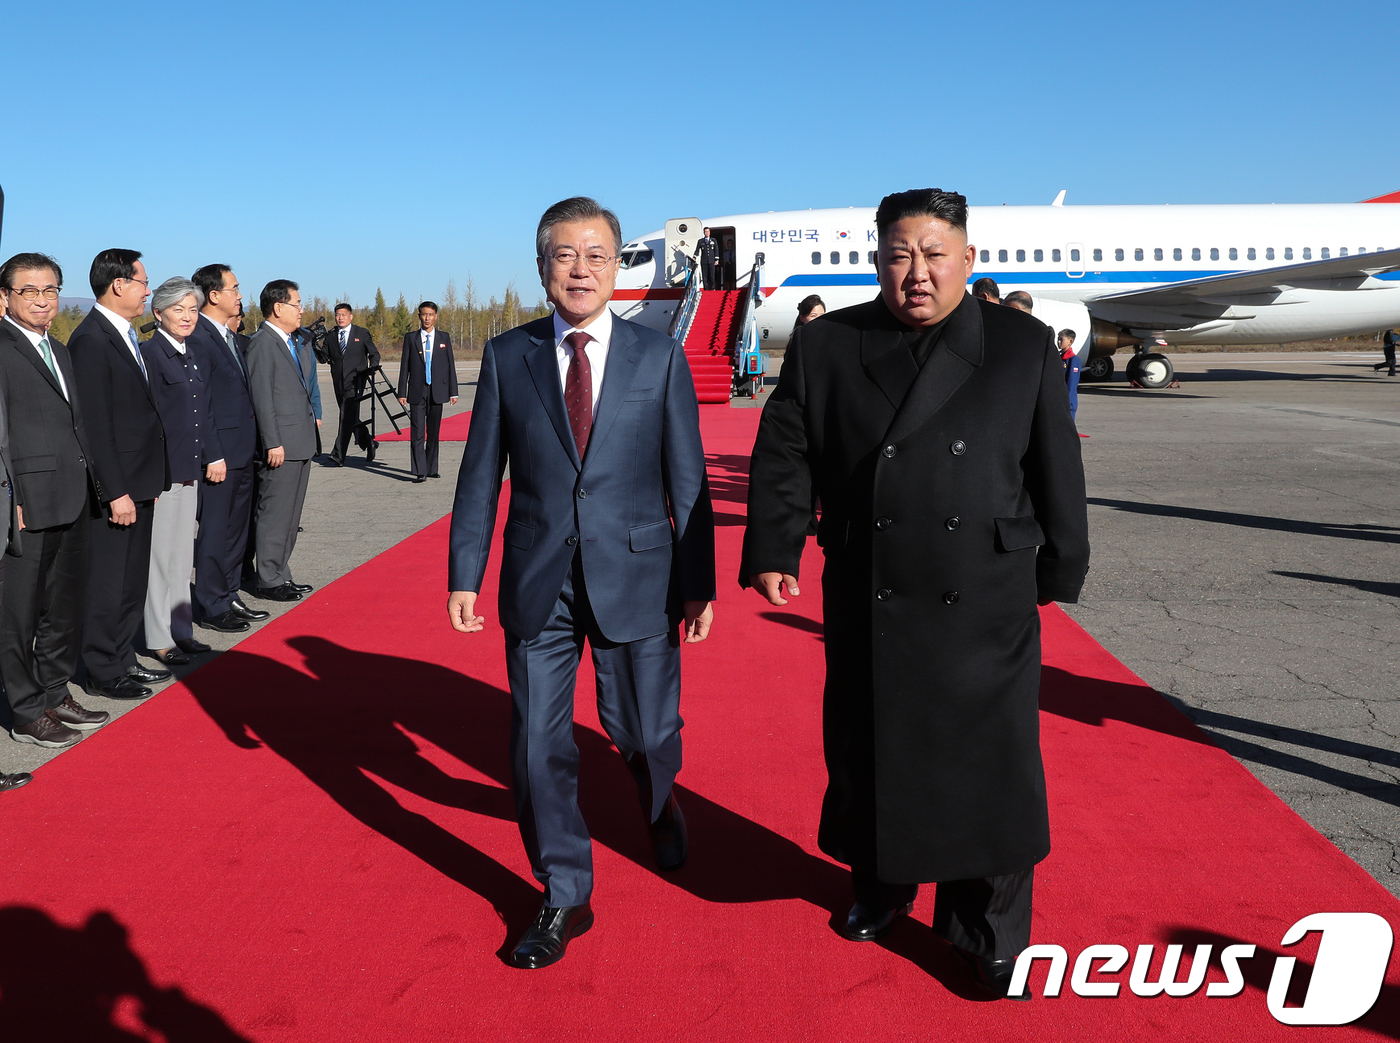 In addition, President Moon is expected to preach the importance of Korean Peninsula peace in every round of the anti-terrorist speech to realize the Korean Peninsula Peace Process, which is the second North American summit  declaration of the end of the war  Kim Jung-Eun North Korea Chairman of the State Council.According to Blue House on December 12, President Moon will visit five European countries in the order of Italy, Vatican Vatican, Belgium and Kingdom of Denmark, starting with France on the 13th, and return home through Seongnam Seoul Airport on the 21st.President Moon, watching BTS performances in France...attention to meetPresident Moon will stay at France from the 13th to the 16th, his first visit, and the Concert of Korea and the Feast schedule on the afternoon of the 14th is noticeable.President Moon will watch BTS performances here.President Moon left a congratulatory message on Facebook in May when BTS became the first Korean singer to reach the top of the Billboard 200 in the United States.Blue House also decided at a Cabinet meeting on the 8th that it would award the Hwagwan Cultural Medal to BTS for its merits in the development of popular culture and arts (the spread of Korean Wave).President Moon - Pope Prevents Invitation to North Korea messagePresident Moon will go to Italy on the 16th and hold a meeting with President Sergio Mattarella Italy on the 17th.Also on the afternoon of the 17th, he will attend the Mass for Peace in Korean Peninsula at St. Peters Cathedral in the Vatican.In Mass, President Moon will speak on the Korean Peninsula Peace Settlement of the Korean government. President Moon and his wife are also devout Catholics.The Vaticans most popular schedule is the meeting between President Moon and Pope Francis.President Moon will deliver a message to the State Councilor Kim Jung-Eun North Korea on the 18th at the meeting to prevent Pope Francis.According to Blue House, President Moon suggested to Kim during the Pyongyang inter-Korean summit last month, Why do not you meet the pope for the prosperity of Korean Peninsula peace? Kim said he would like to welcome the pope if he visits Pyongyang.If the pope accepts Kims invitation to visit North Korea and actually visits North Korea, it will be the first pope to step on the North Korea land.Blue House expects that North Korea will have a positive impact on promoting the peace of Korean Peninsula by publicizing its willingness to change as a normal state when the Popes visit to North Korea is concluded.President Moons role theory is also expected to receive international overvaluation.ASEM Summit attends... emphasis on Korean Peninsula Permanent PeacePresident Moon will move to Belgium to attend the ASEM Summit, which was the occasion for the European tour after meeting with the pope on the 18th.President Moon will present the government vision for  inclusive economic growth  economic digitization through the ASEM Summit leading speech on the theme of Global Partners for Solving Global Challenges on the following day, 19th.President Moon will also discuss the policies and efforts of the Korean government on denuclearization of Korean Peninsula and permanent peace settlement through a luncheon session.President Moon will attend the P4G (Solidarity for Green Growth and 2030 Global Goals) summit in Copenhagen, Kingdom of Denmark, on the 20th to deliver a keynote speech urging international cooperation on climate change.He will then return home after a meeting with Queen Kingdom of Denmark, a meeting with Prime Minister Lars Löke Rasmussen - Kingdom of Denmark summit.Kim Jung-Eun message delivered to the Vatican Mass and ASEM Summit speech on Korean Peninsula Peace